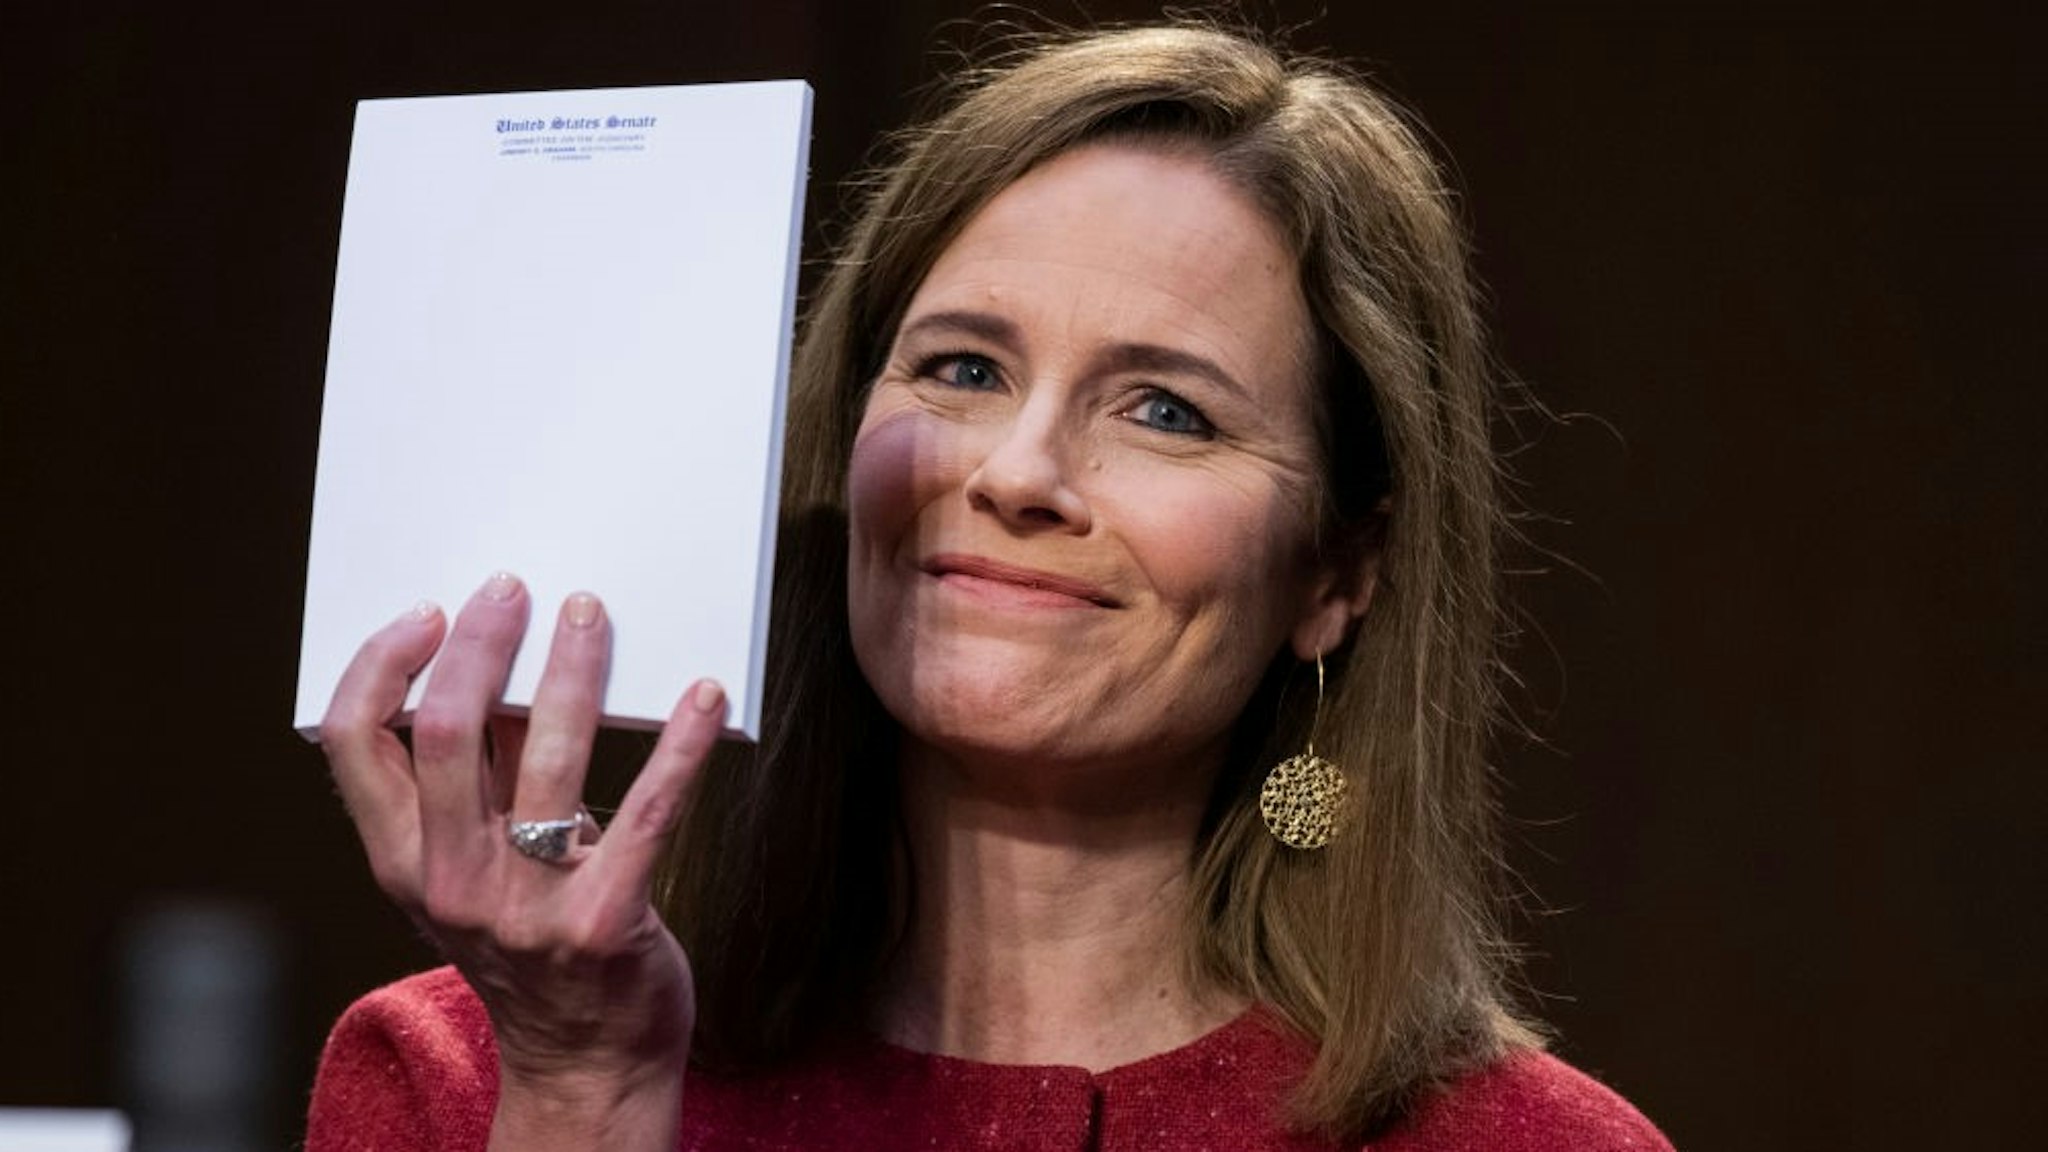 WASHINGTON, DC - OCTOBER 13: Supreme Court justice nominee Amy Coney Barrett holds up her notepad at the request of Sen. John Cornyn, R-Texas, on the second day of her Senate Judiciary Committee confirmation hearing in Hart Senate Office Building on October 13, 2020 in Washington, DC. Barrett was nominated by President Donald Trump to fill the vacancy left by Justice Ruth Bader Ginsburg who passed away in September. (Photo by